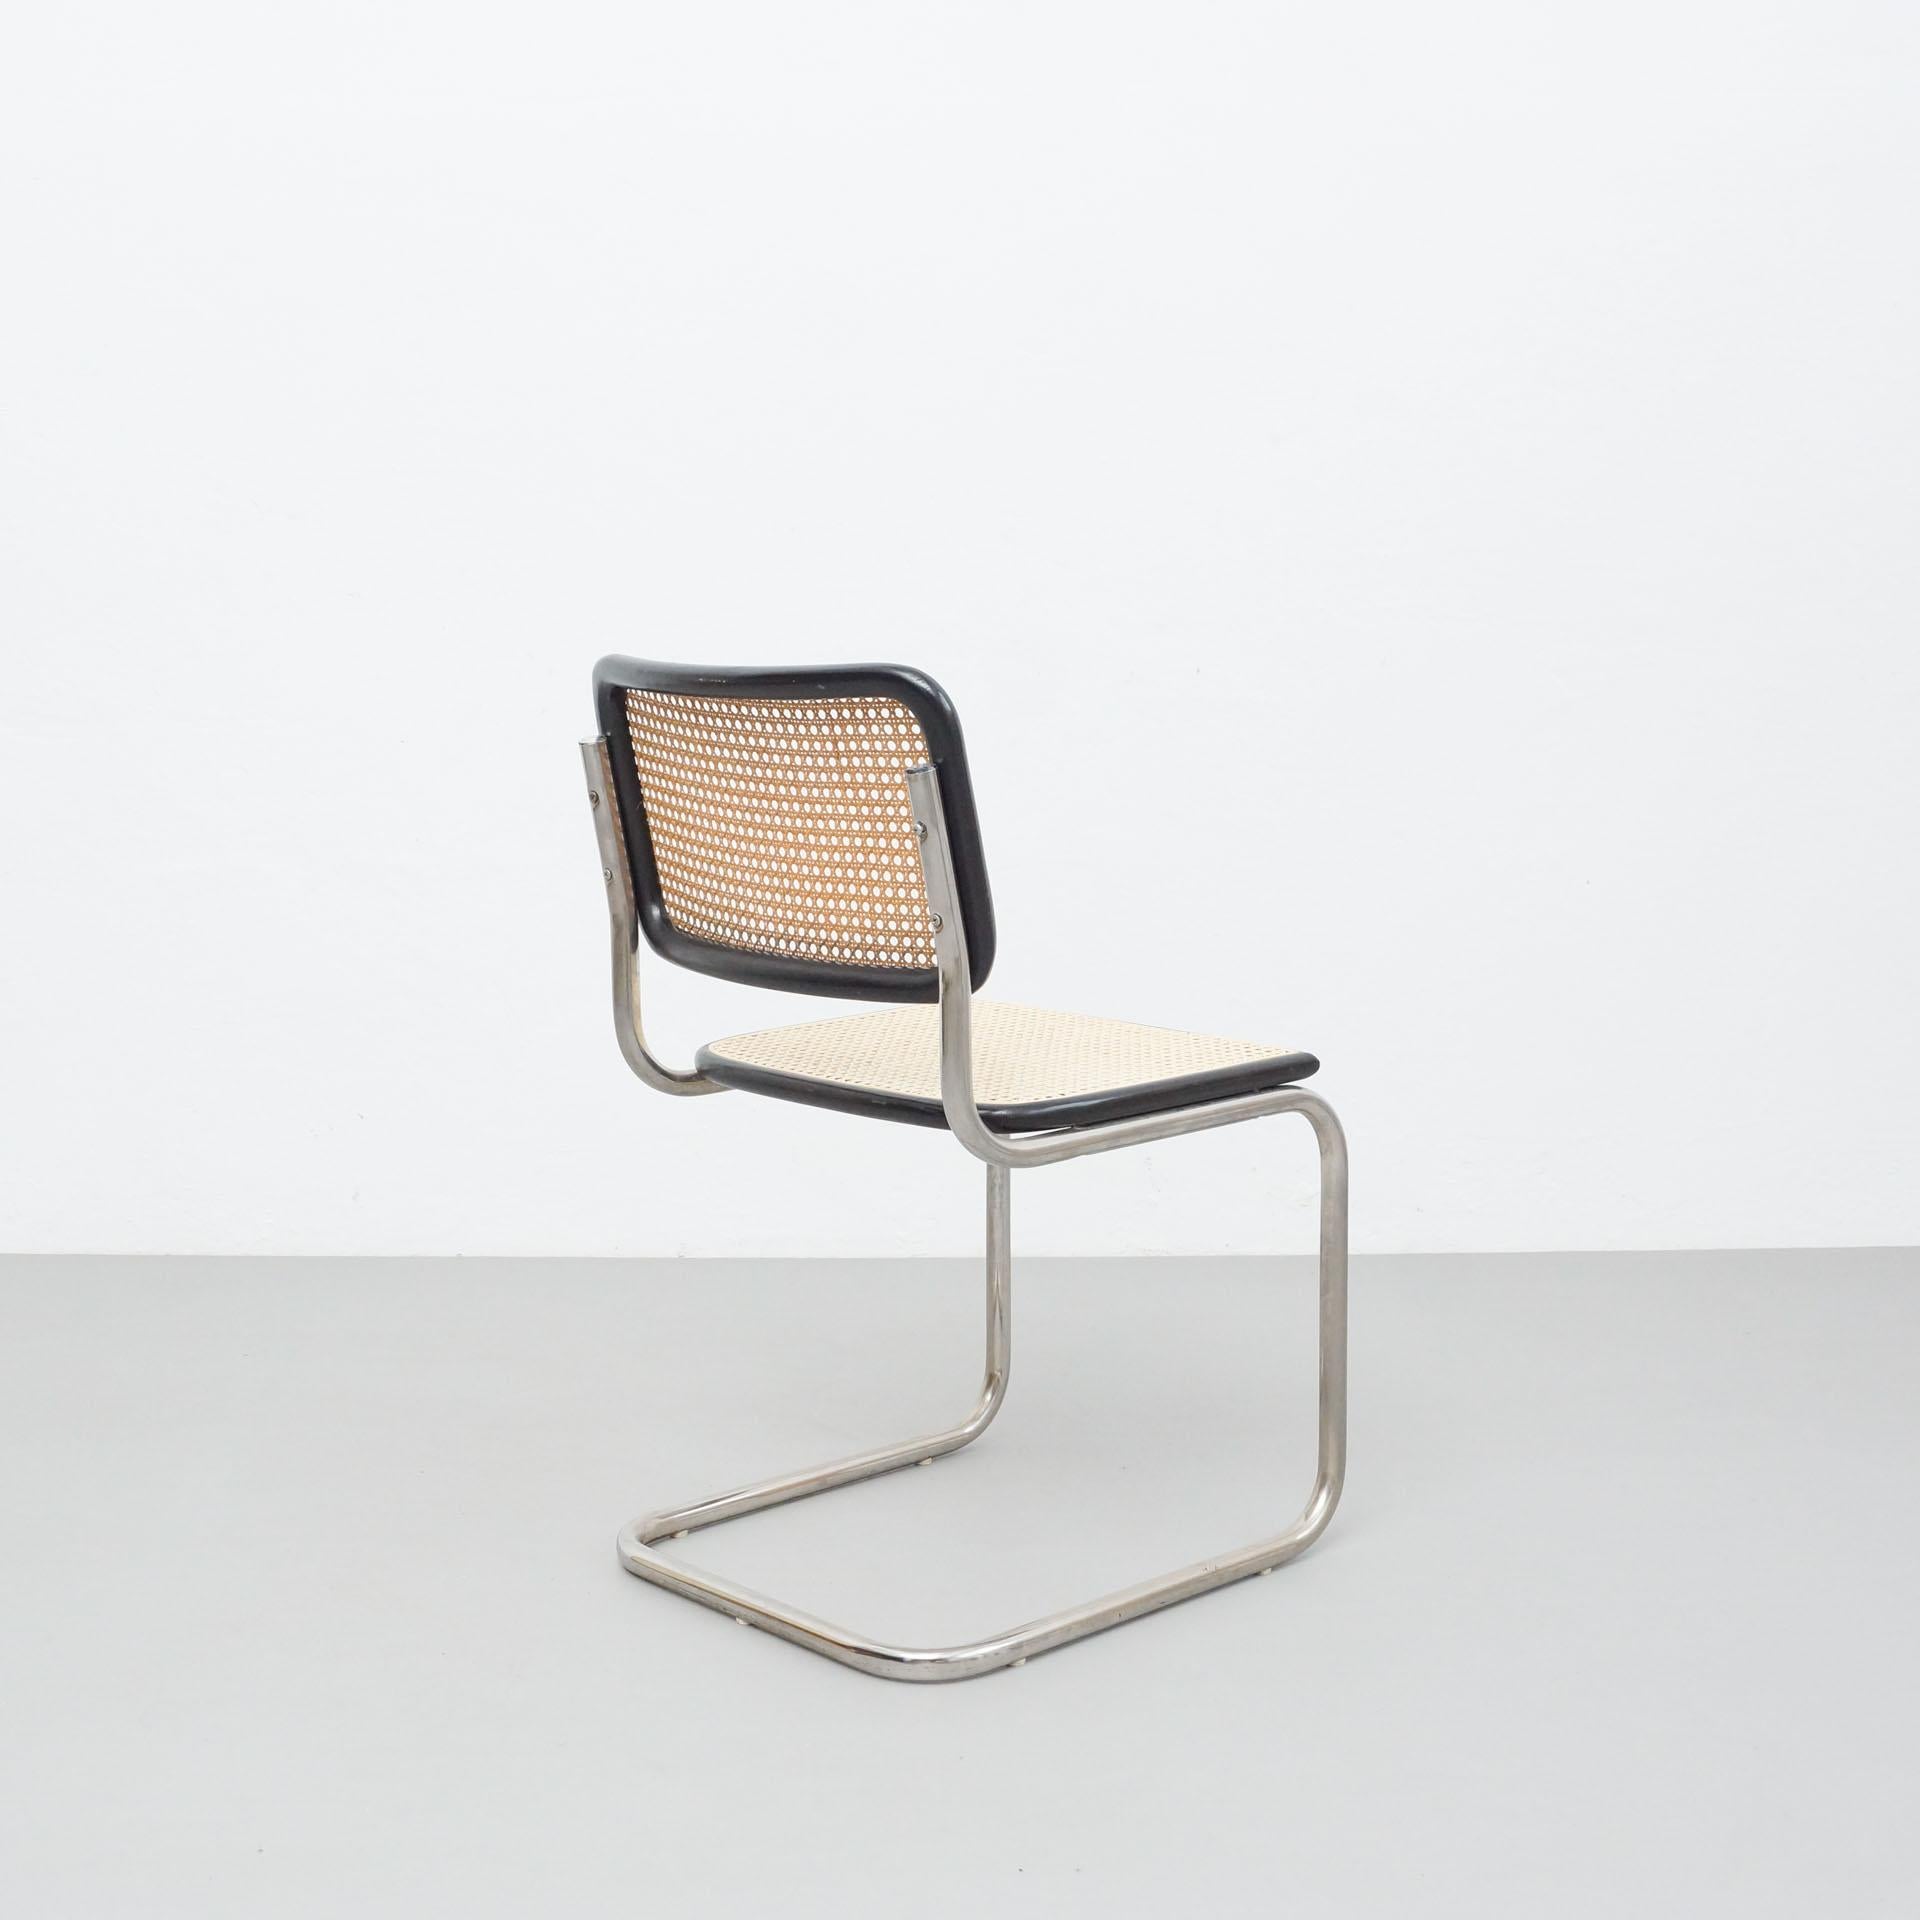 Late 20th Century Chair in the Style of M.Breuer, circa 1970